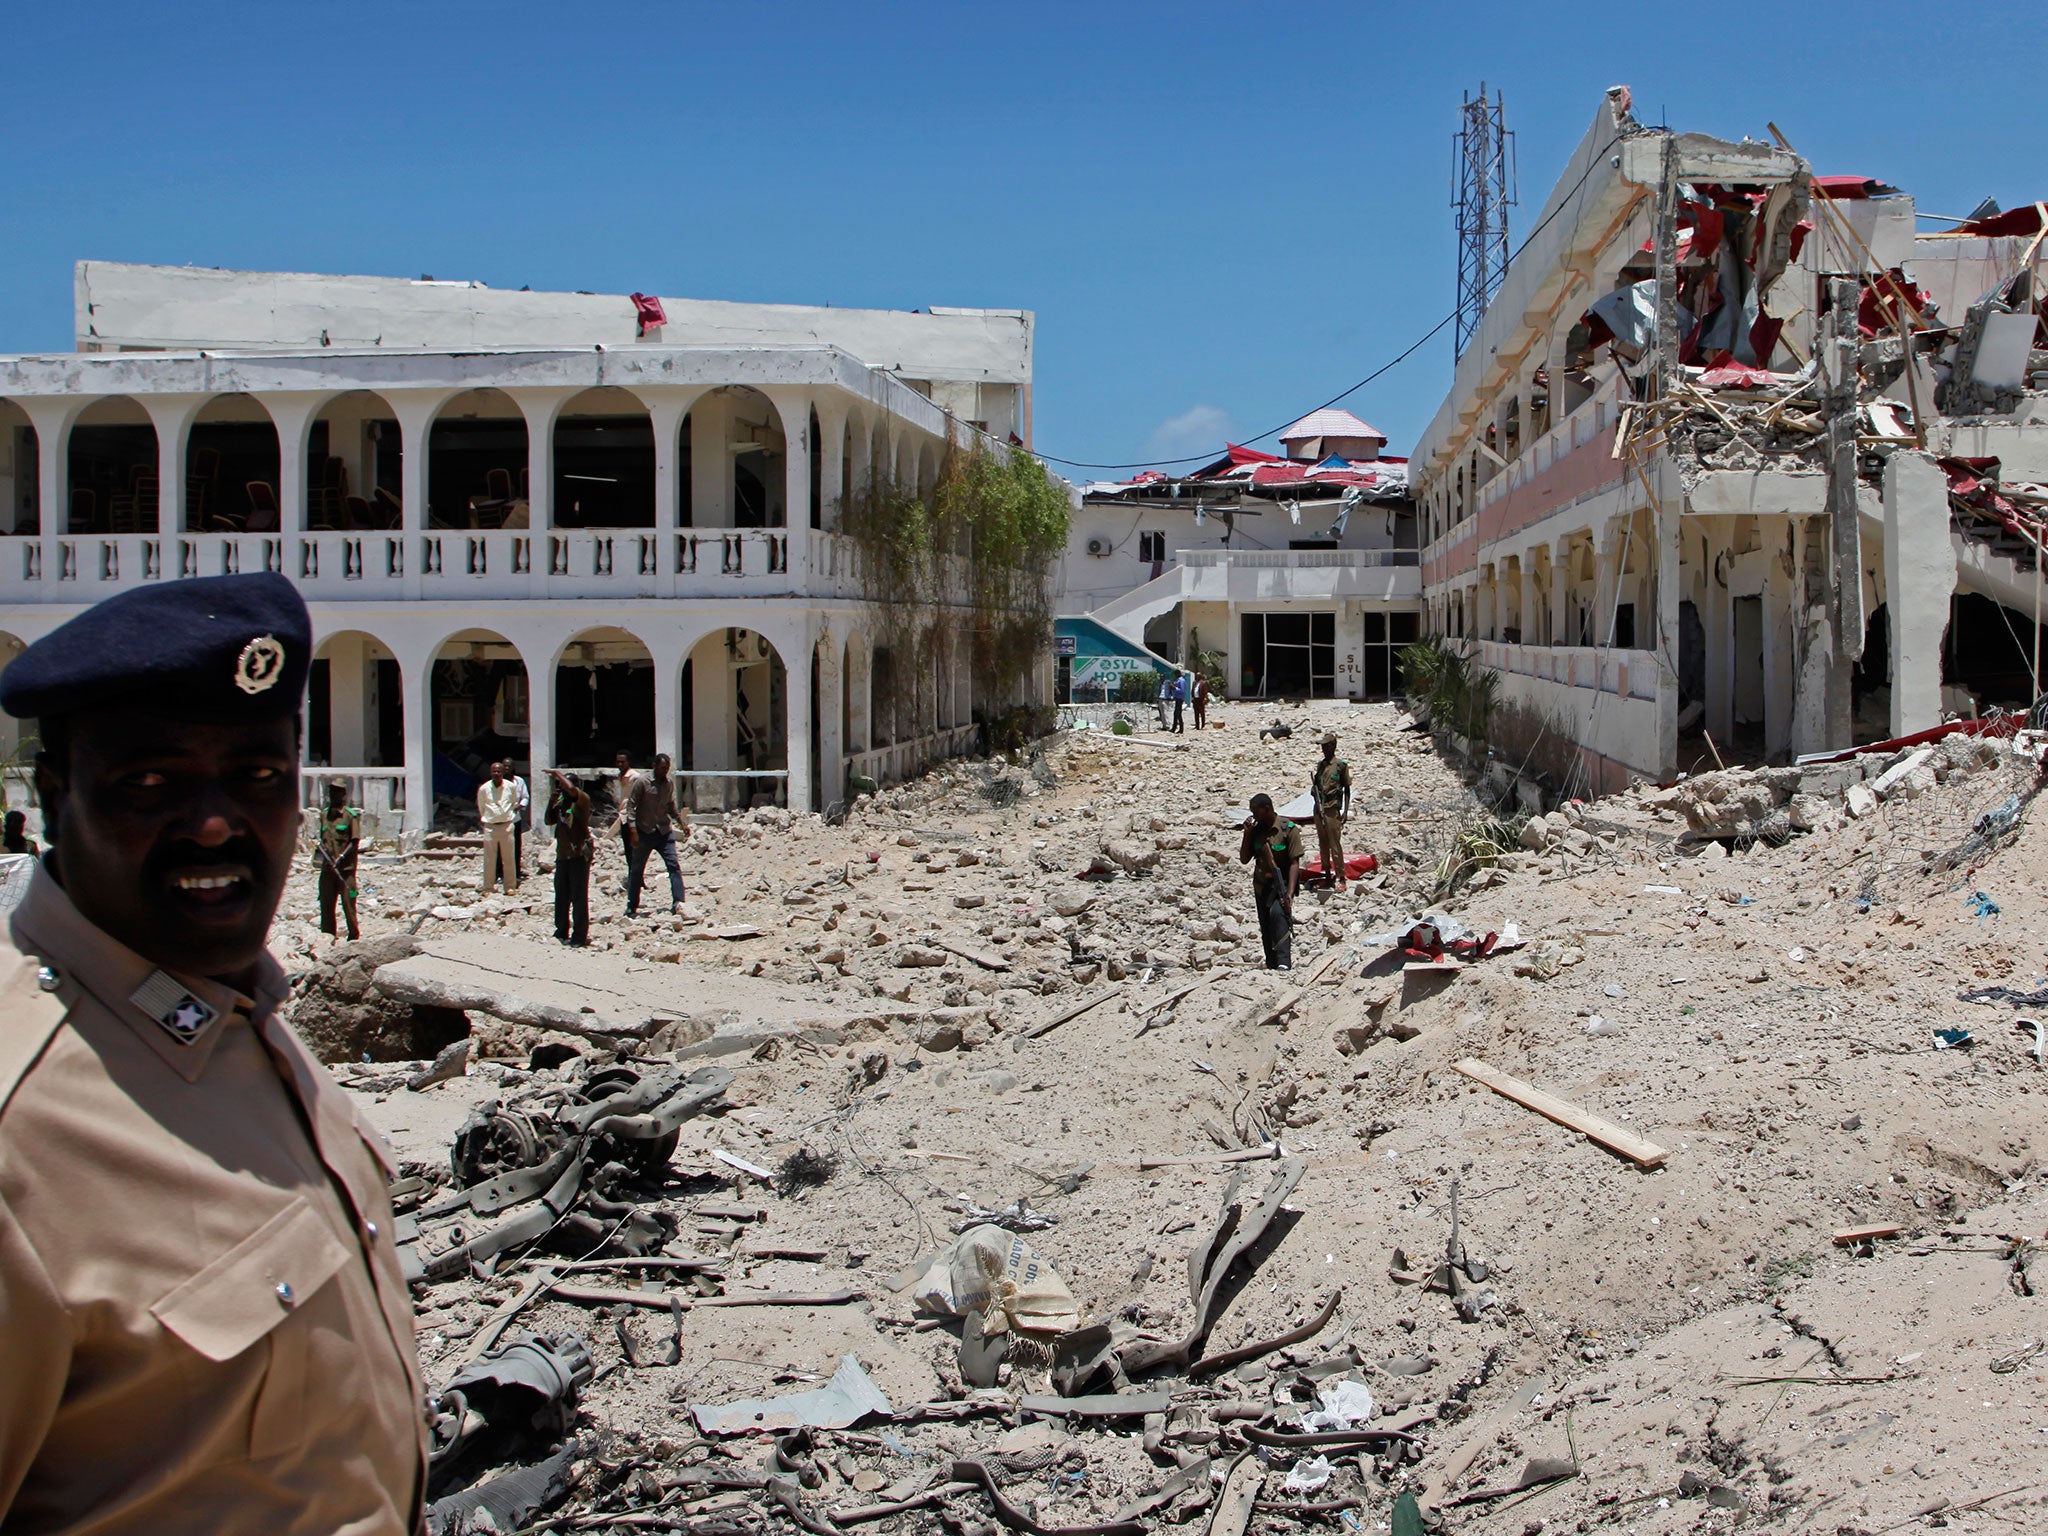 Soldiers near a building destroyed by a blast near the presidential palace in Mogadishu, Somalia, on 30 August